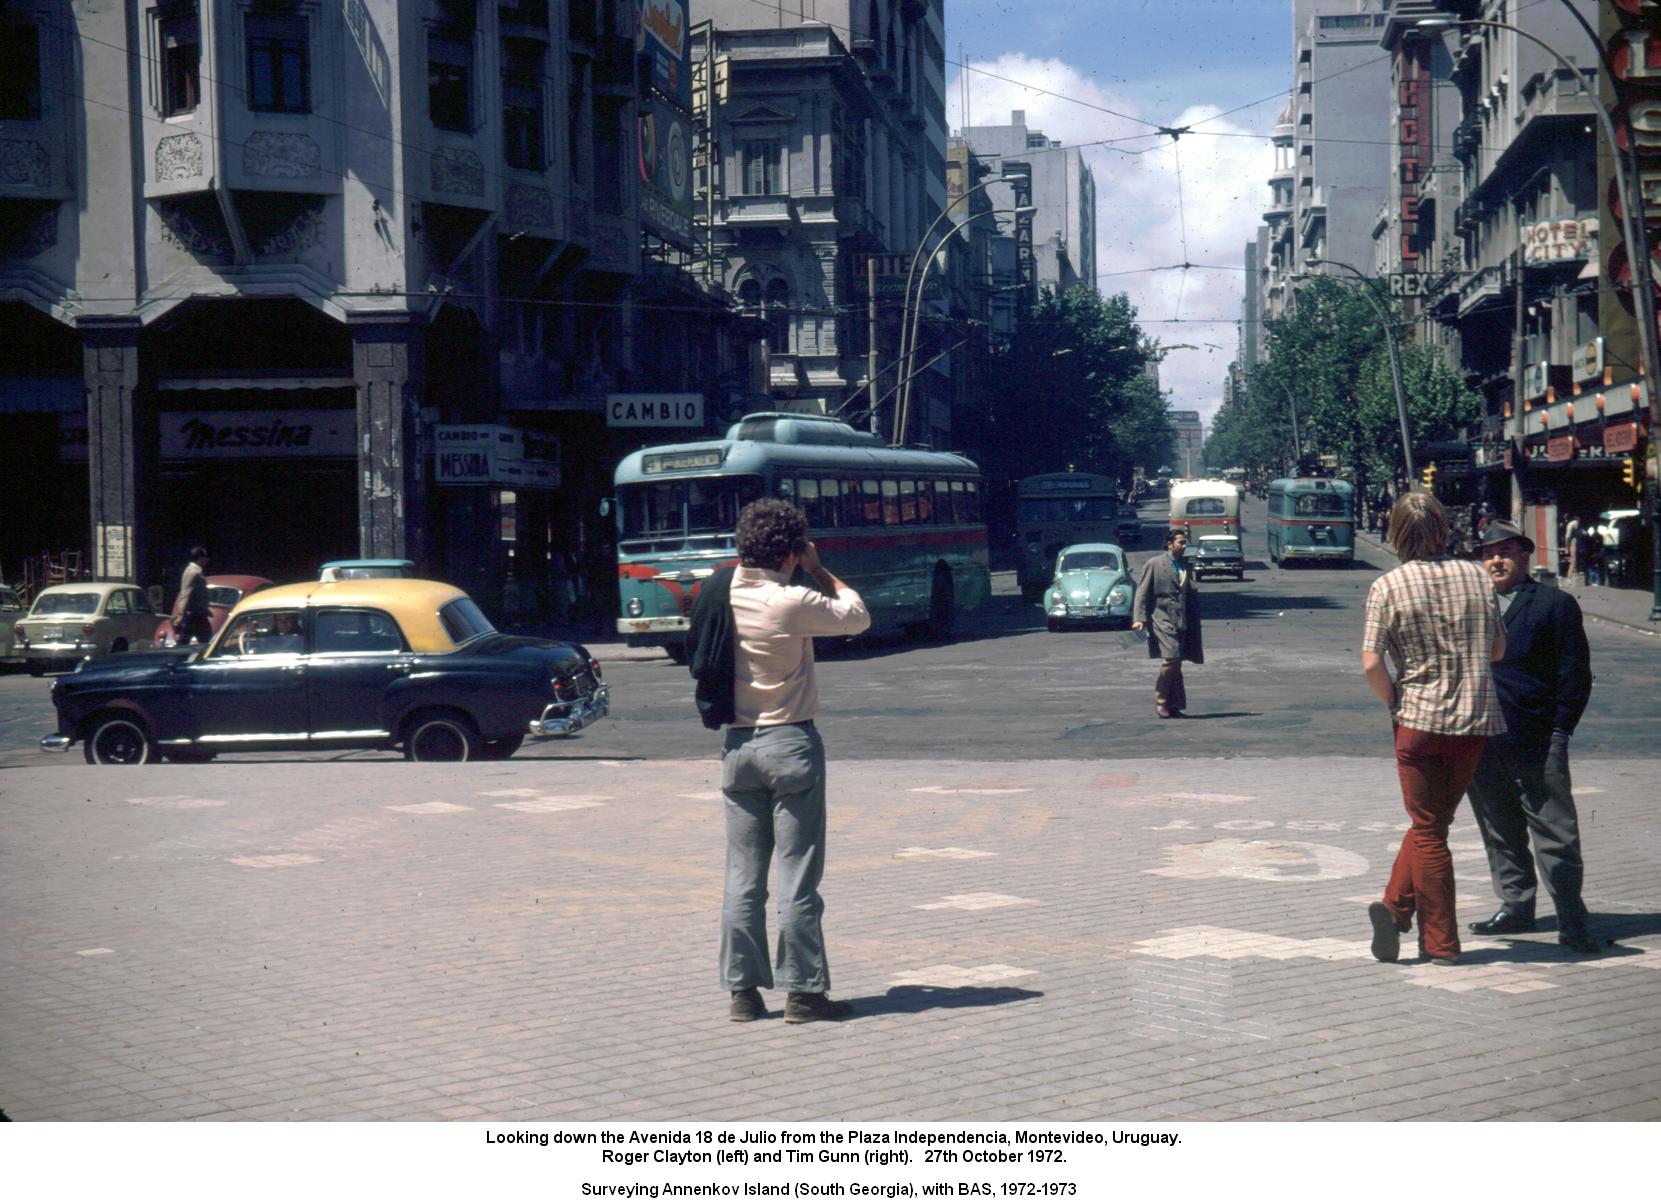 Looking down the Avenida 18 de Julio from the Plaza Independencia, Montevideo, Uruguay, 27th October 1972.